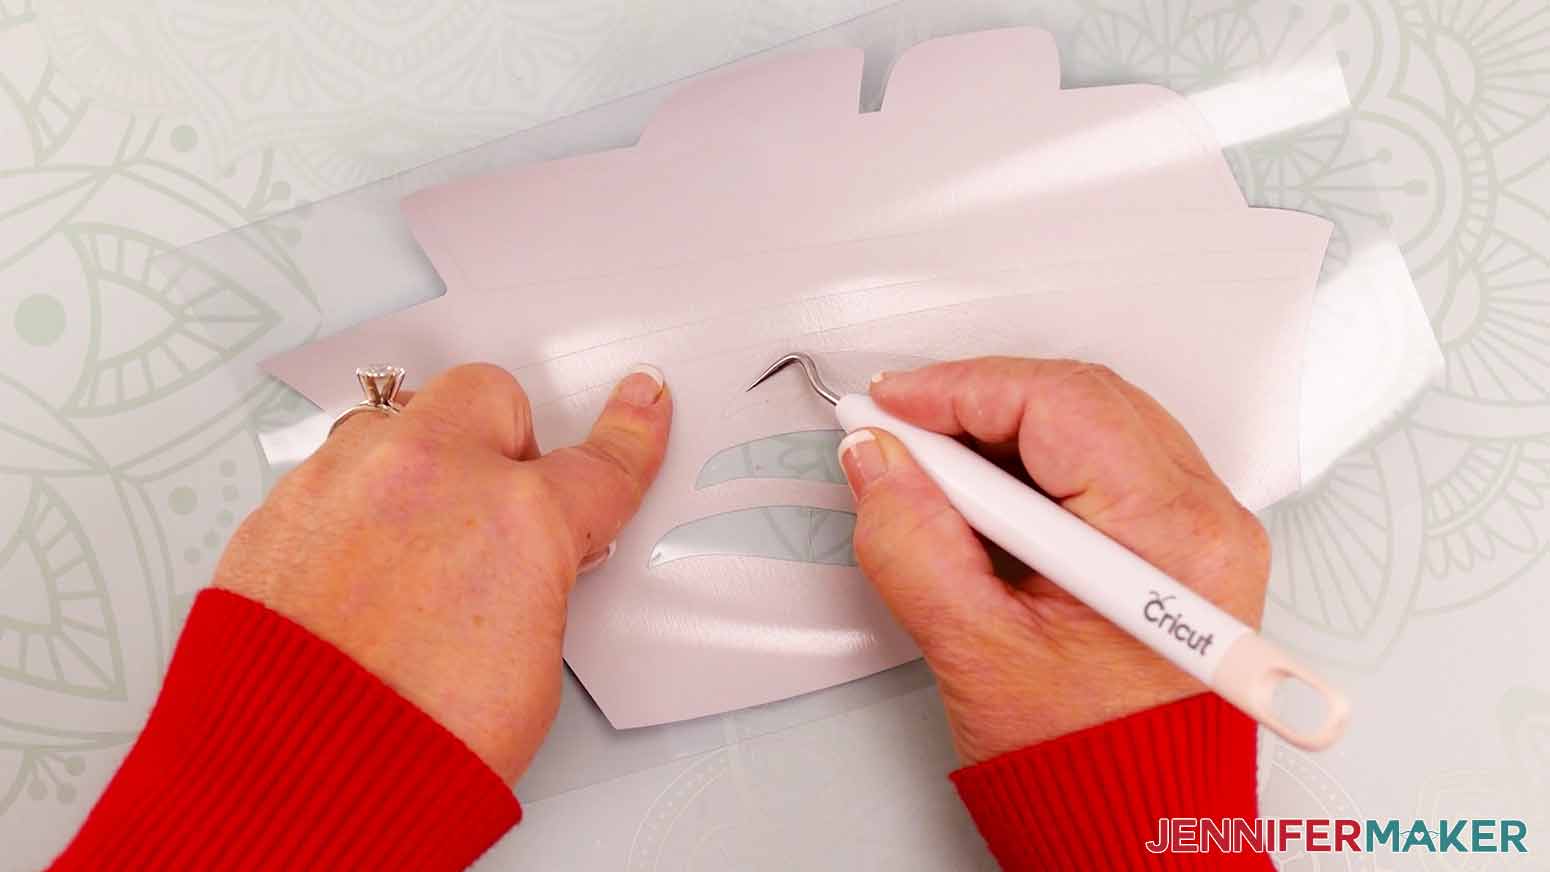 Use weeding tool to remove extra vinyl from design.